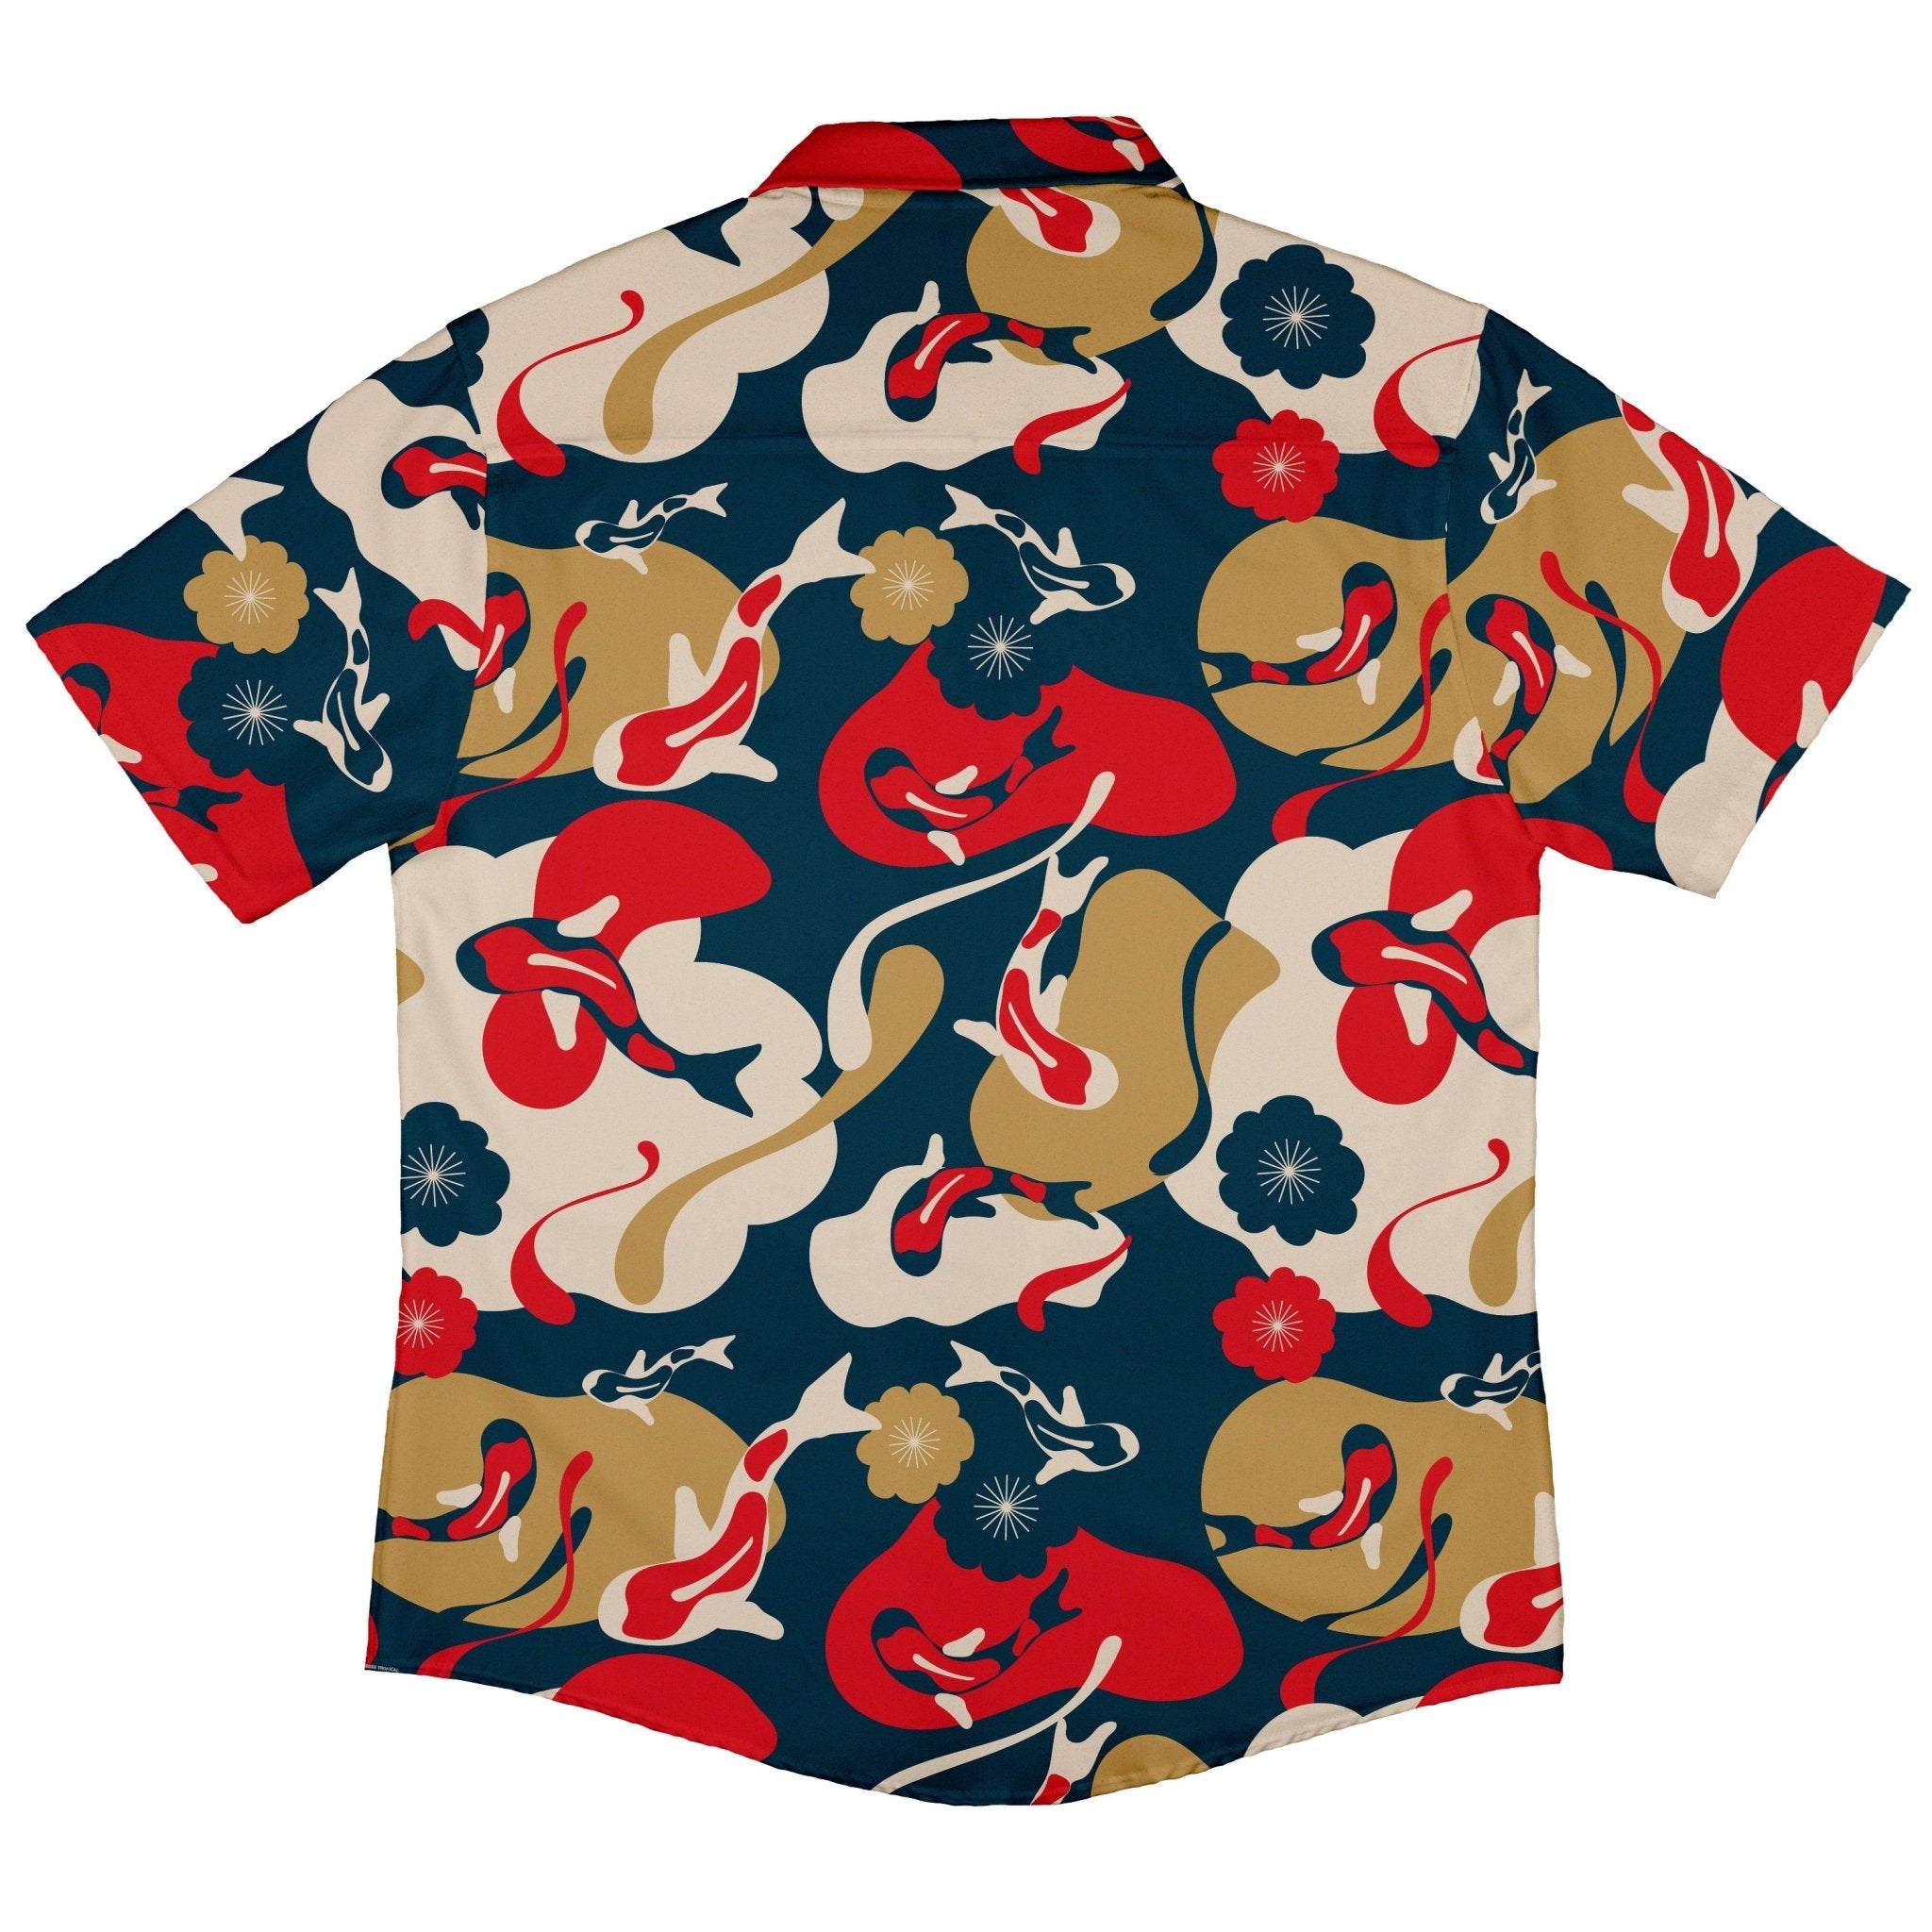 Modern Koi Button Up Shirt - adult sizing - Anime - Design by Claire Murphy